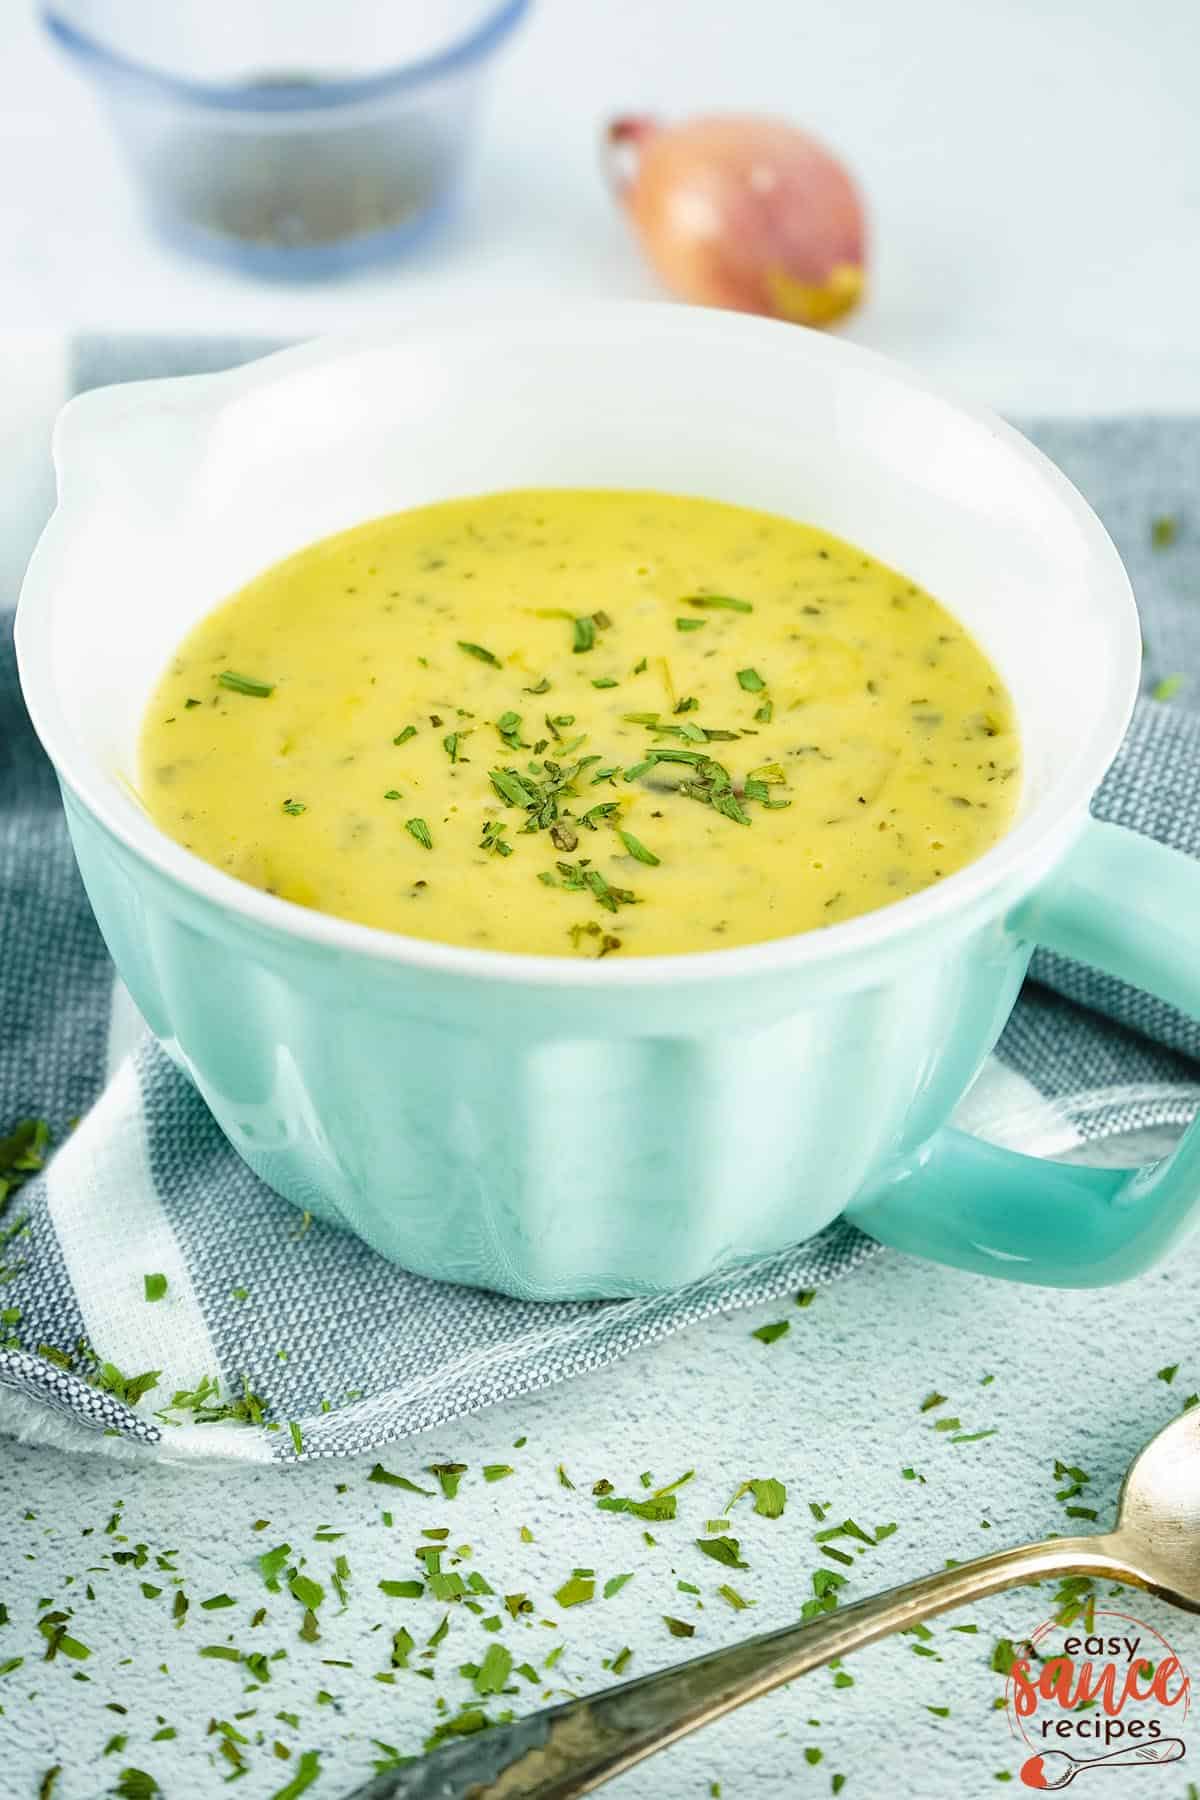 a turquoise gravy boat filled with bearnaise sauce resting on a grey towel, with a shallot, spoon and herbs in the background